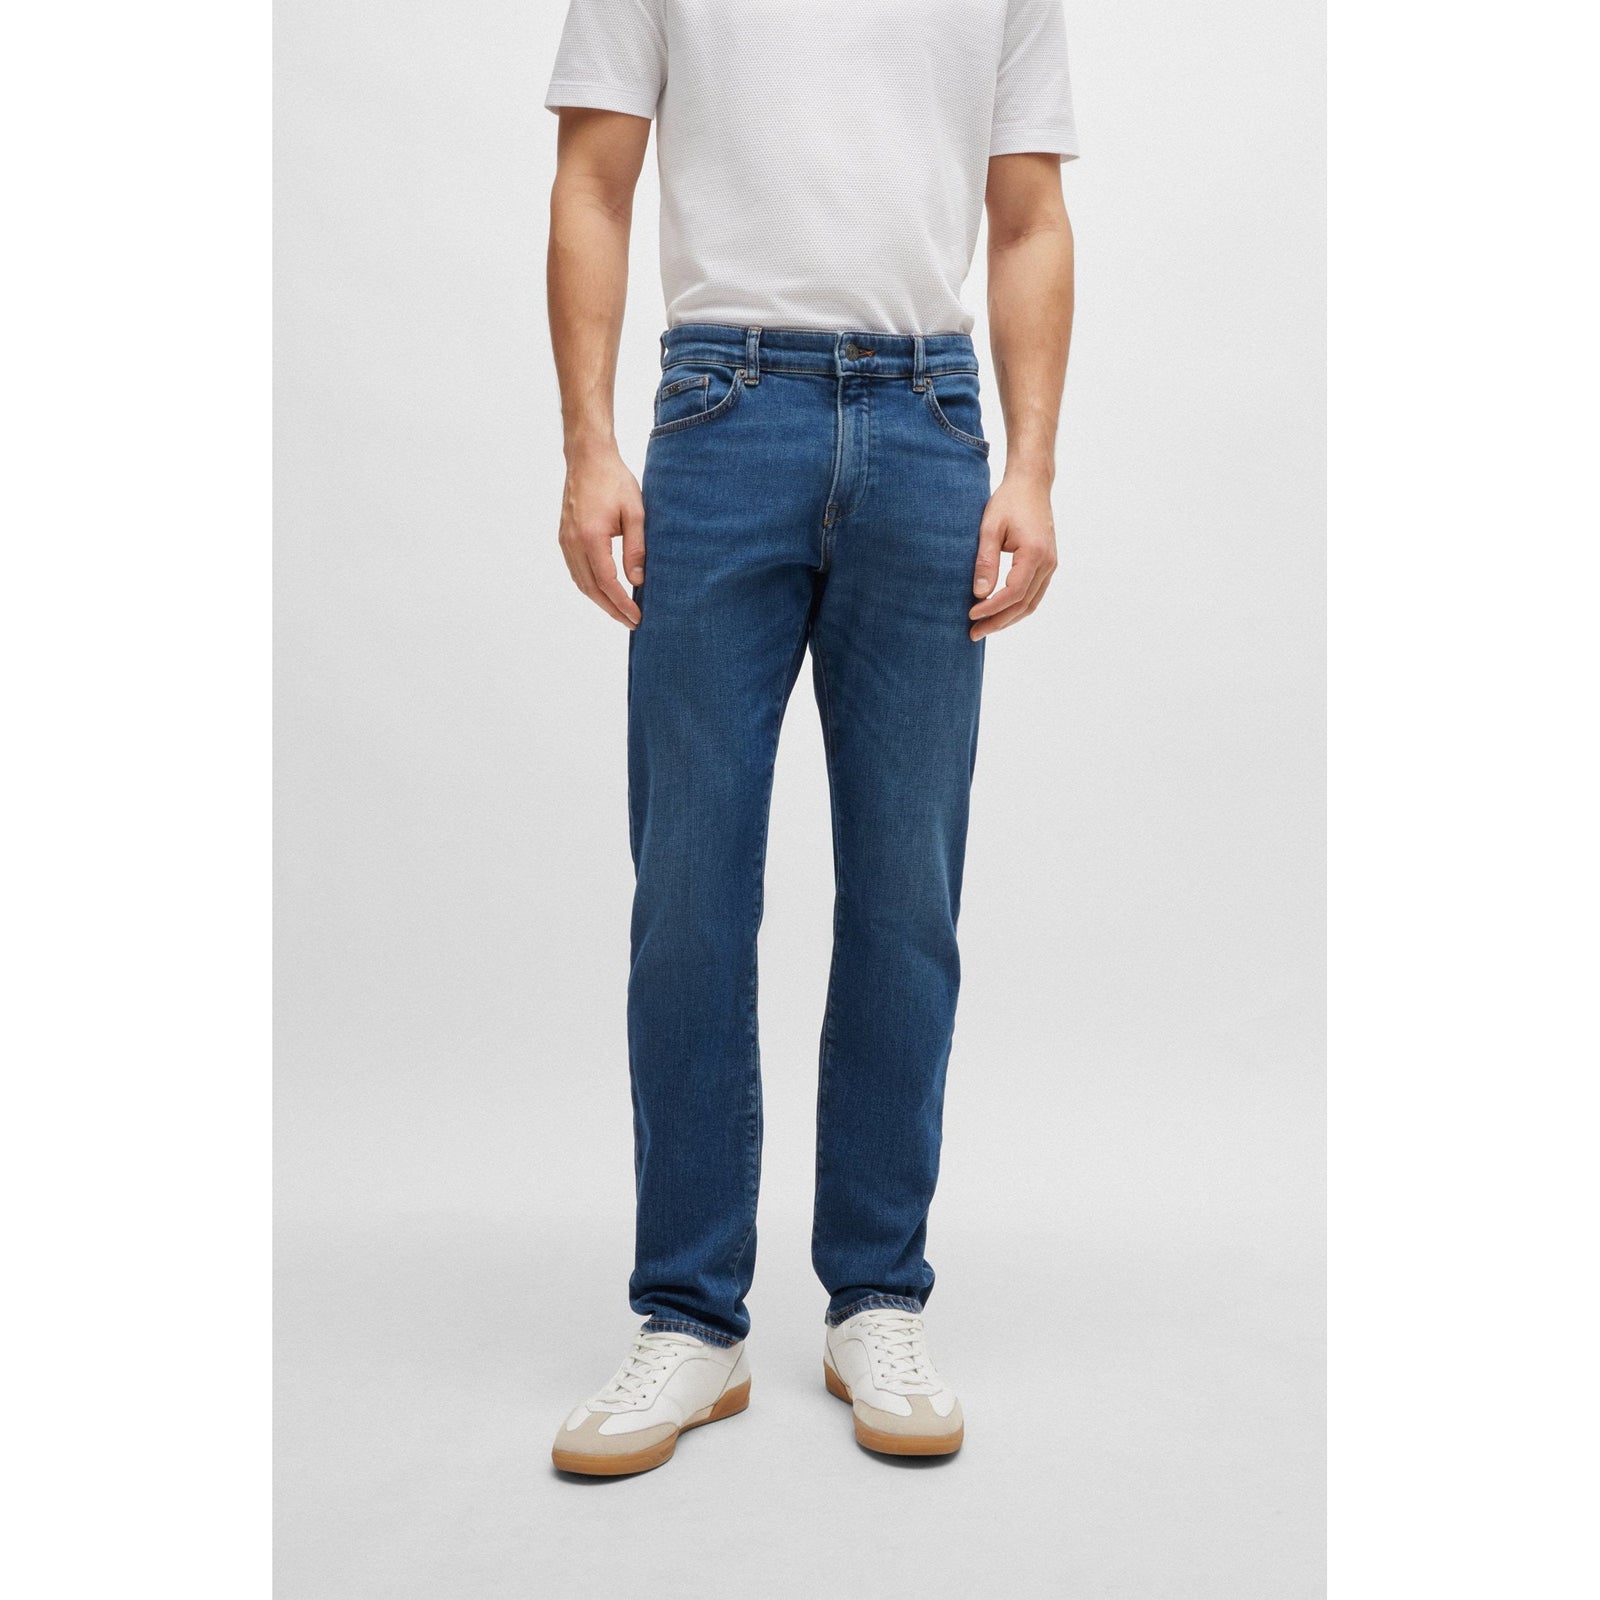 BOSS SLIM FIT JEANS IN COMFORTABLE BLUE STRETCH DENIM - Yooto